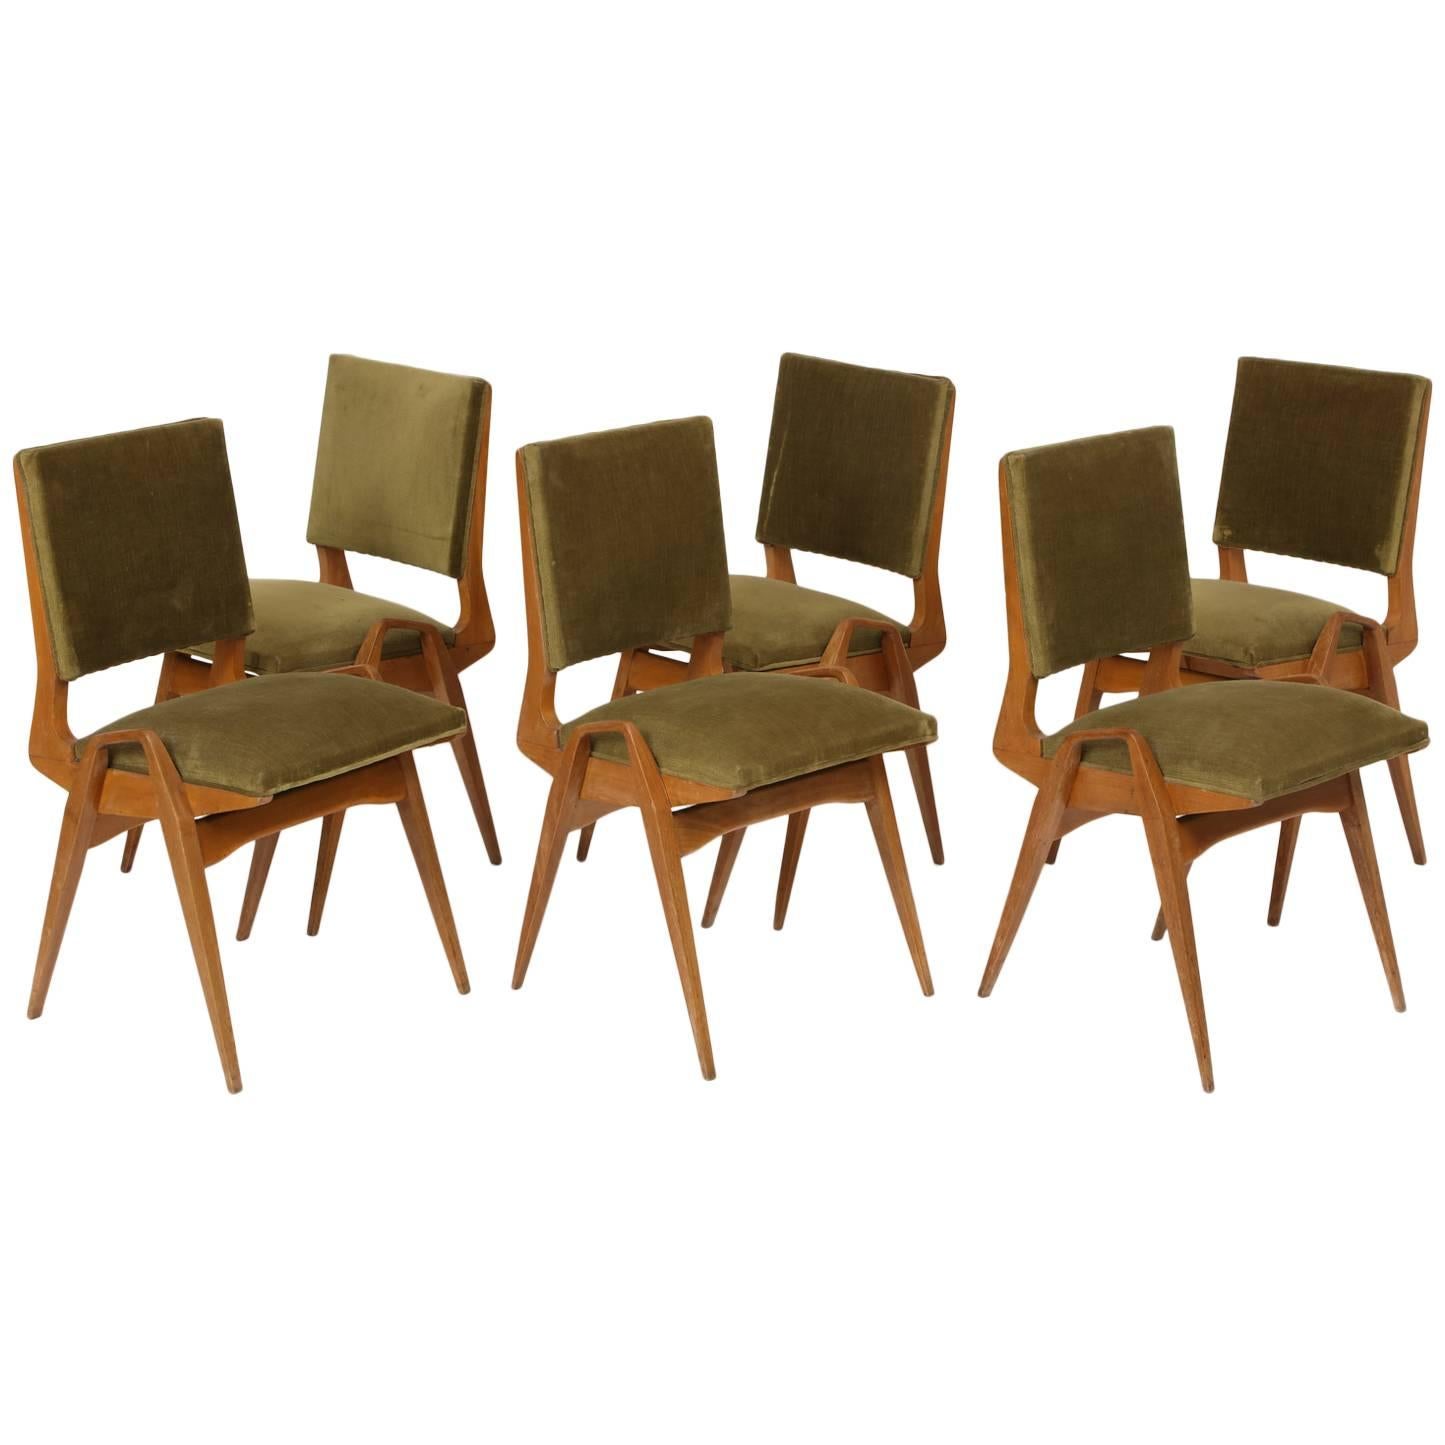 French Mid-Century Dining Chairs 1950s Maurice Pre Architectural